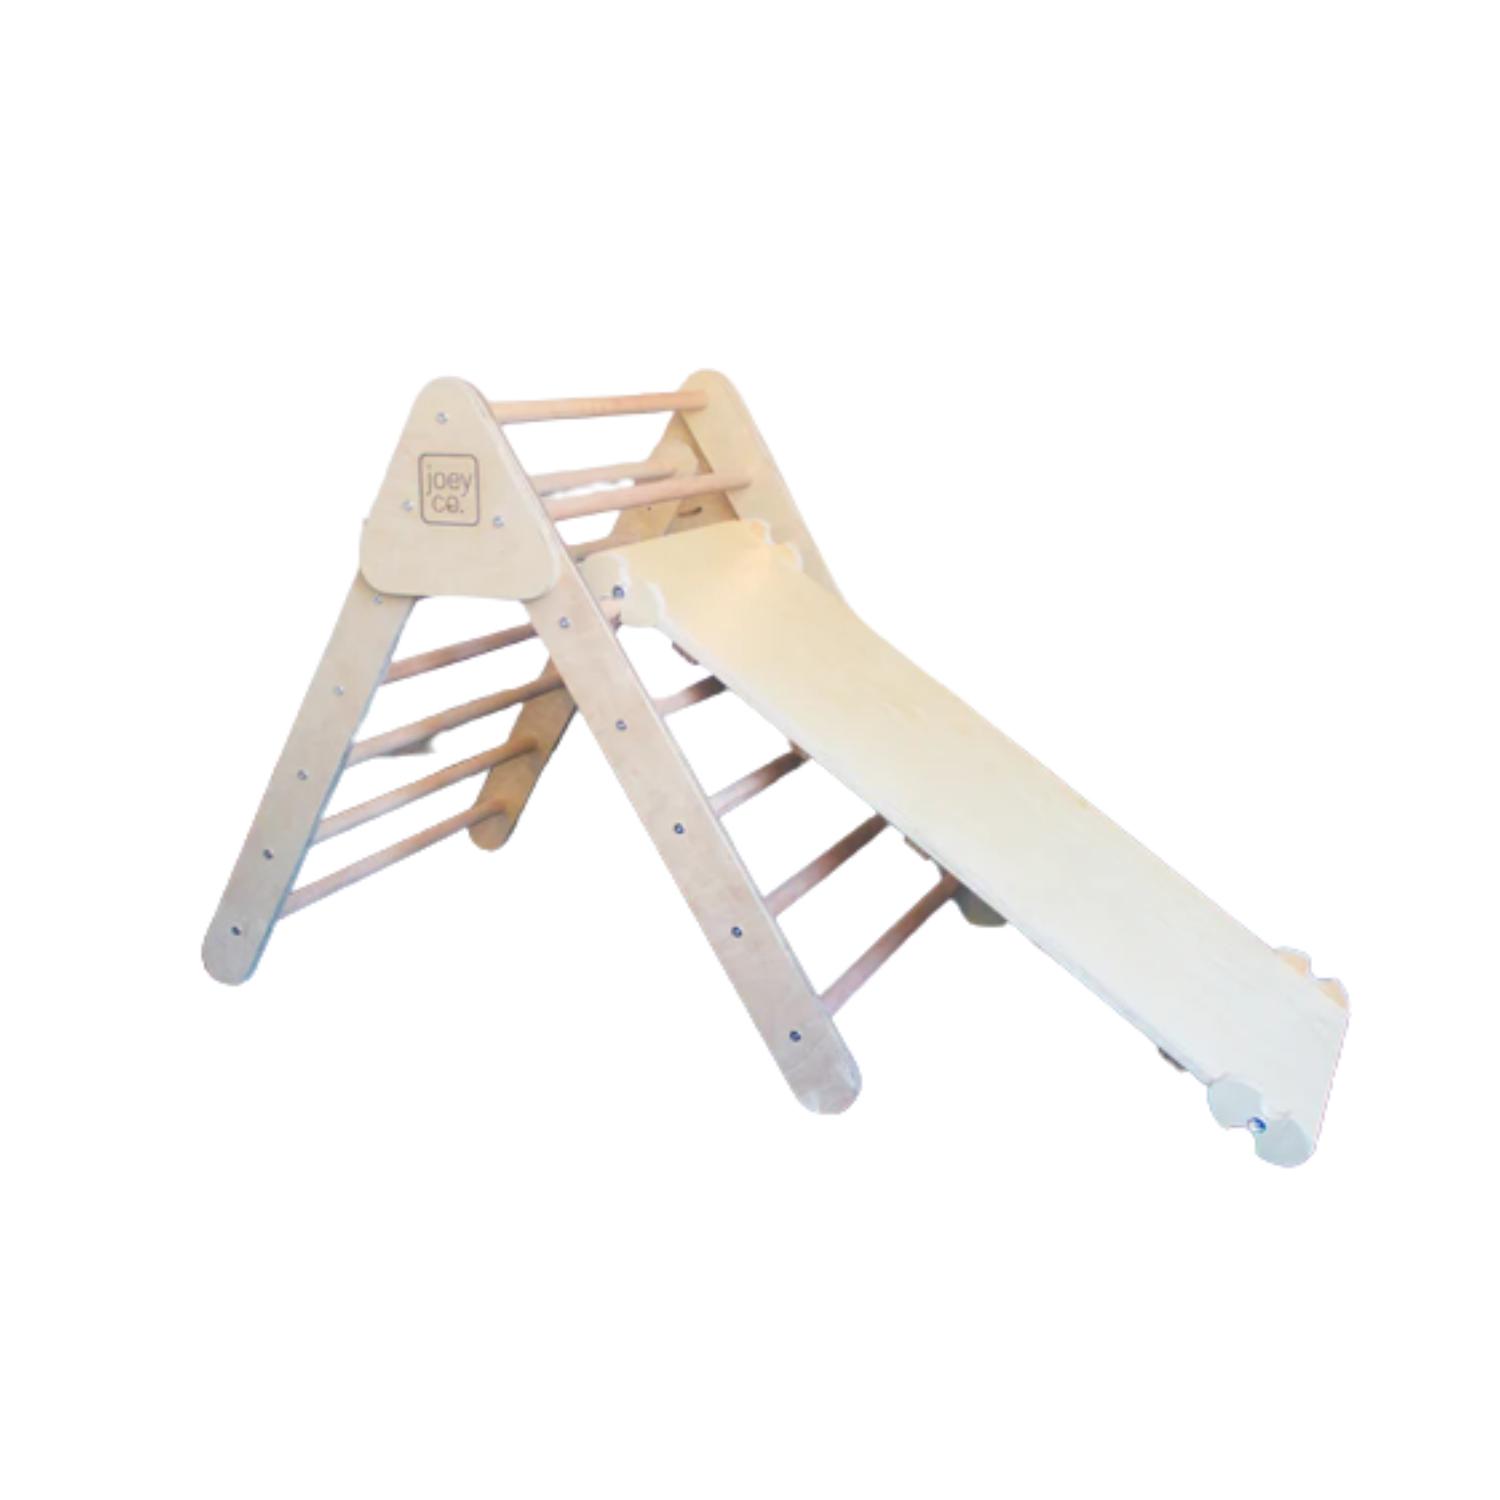 Montessori Joey Co Climber Triangle With Double-Sided Slide